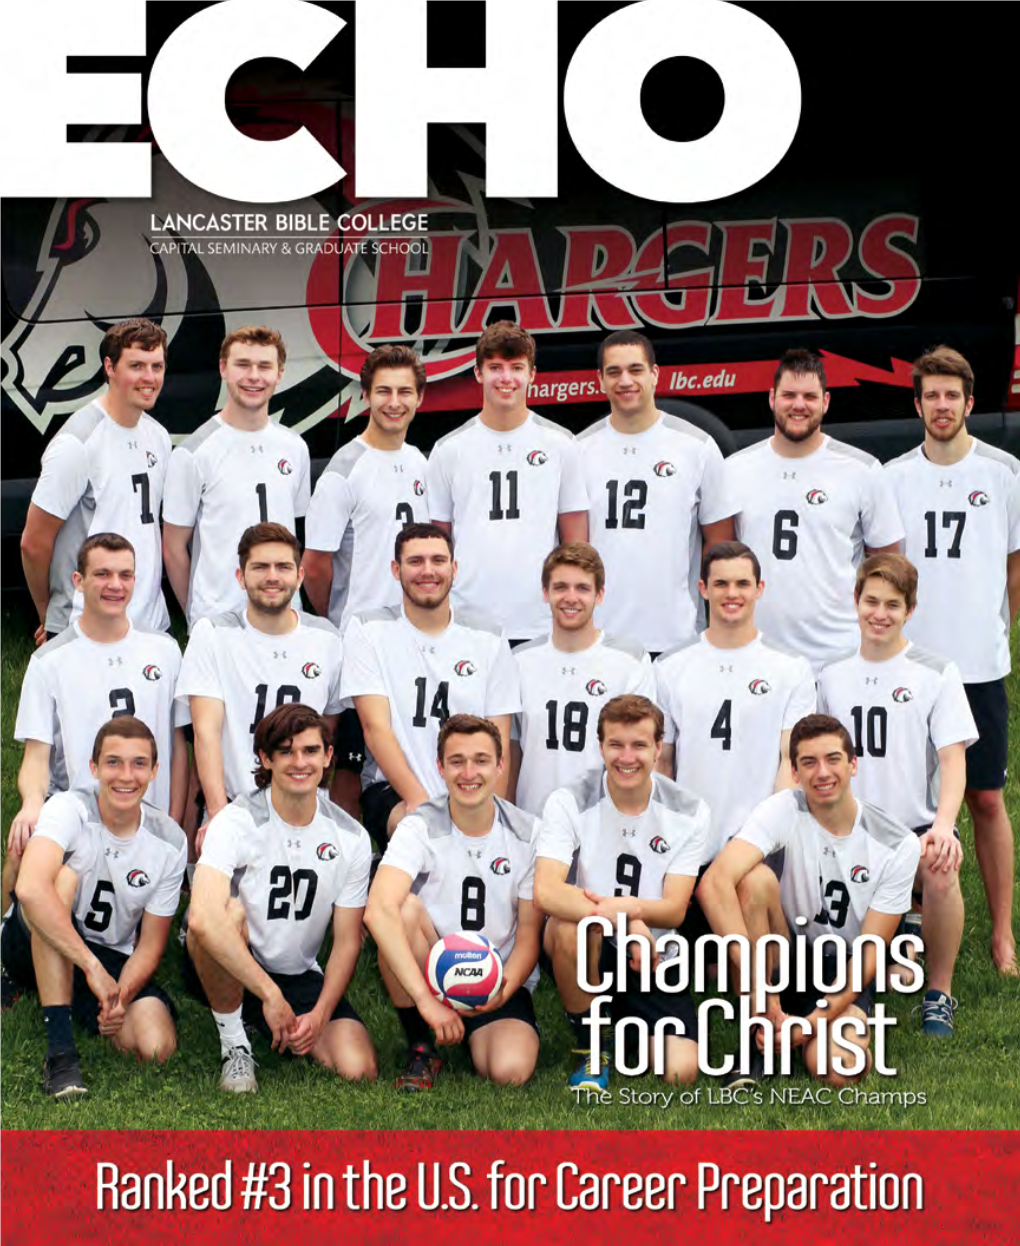 ECHO 2 Contents This Magazine Is Produced Three Times a Year to Provide Students, Alumni, Parents, Friends and SUMMER 2018, Volume 16 | No